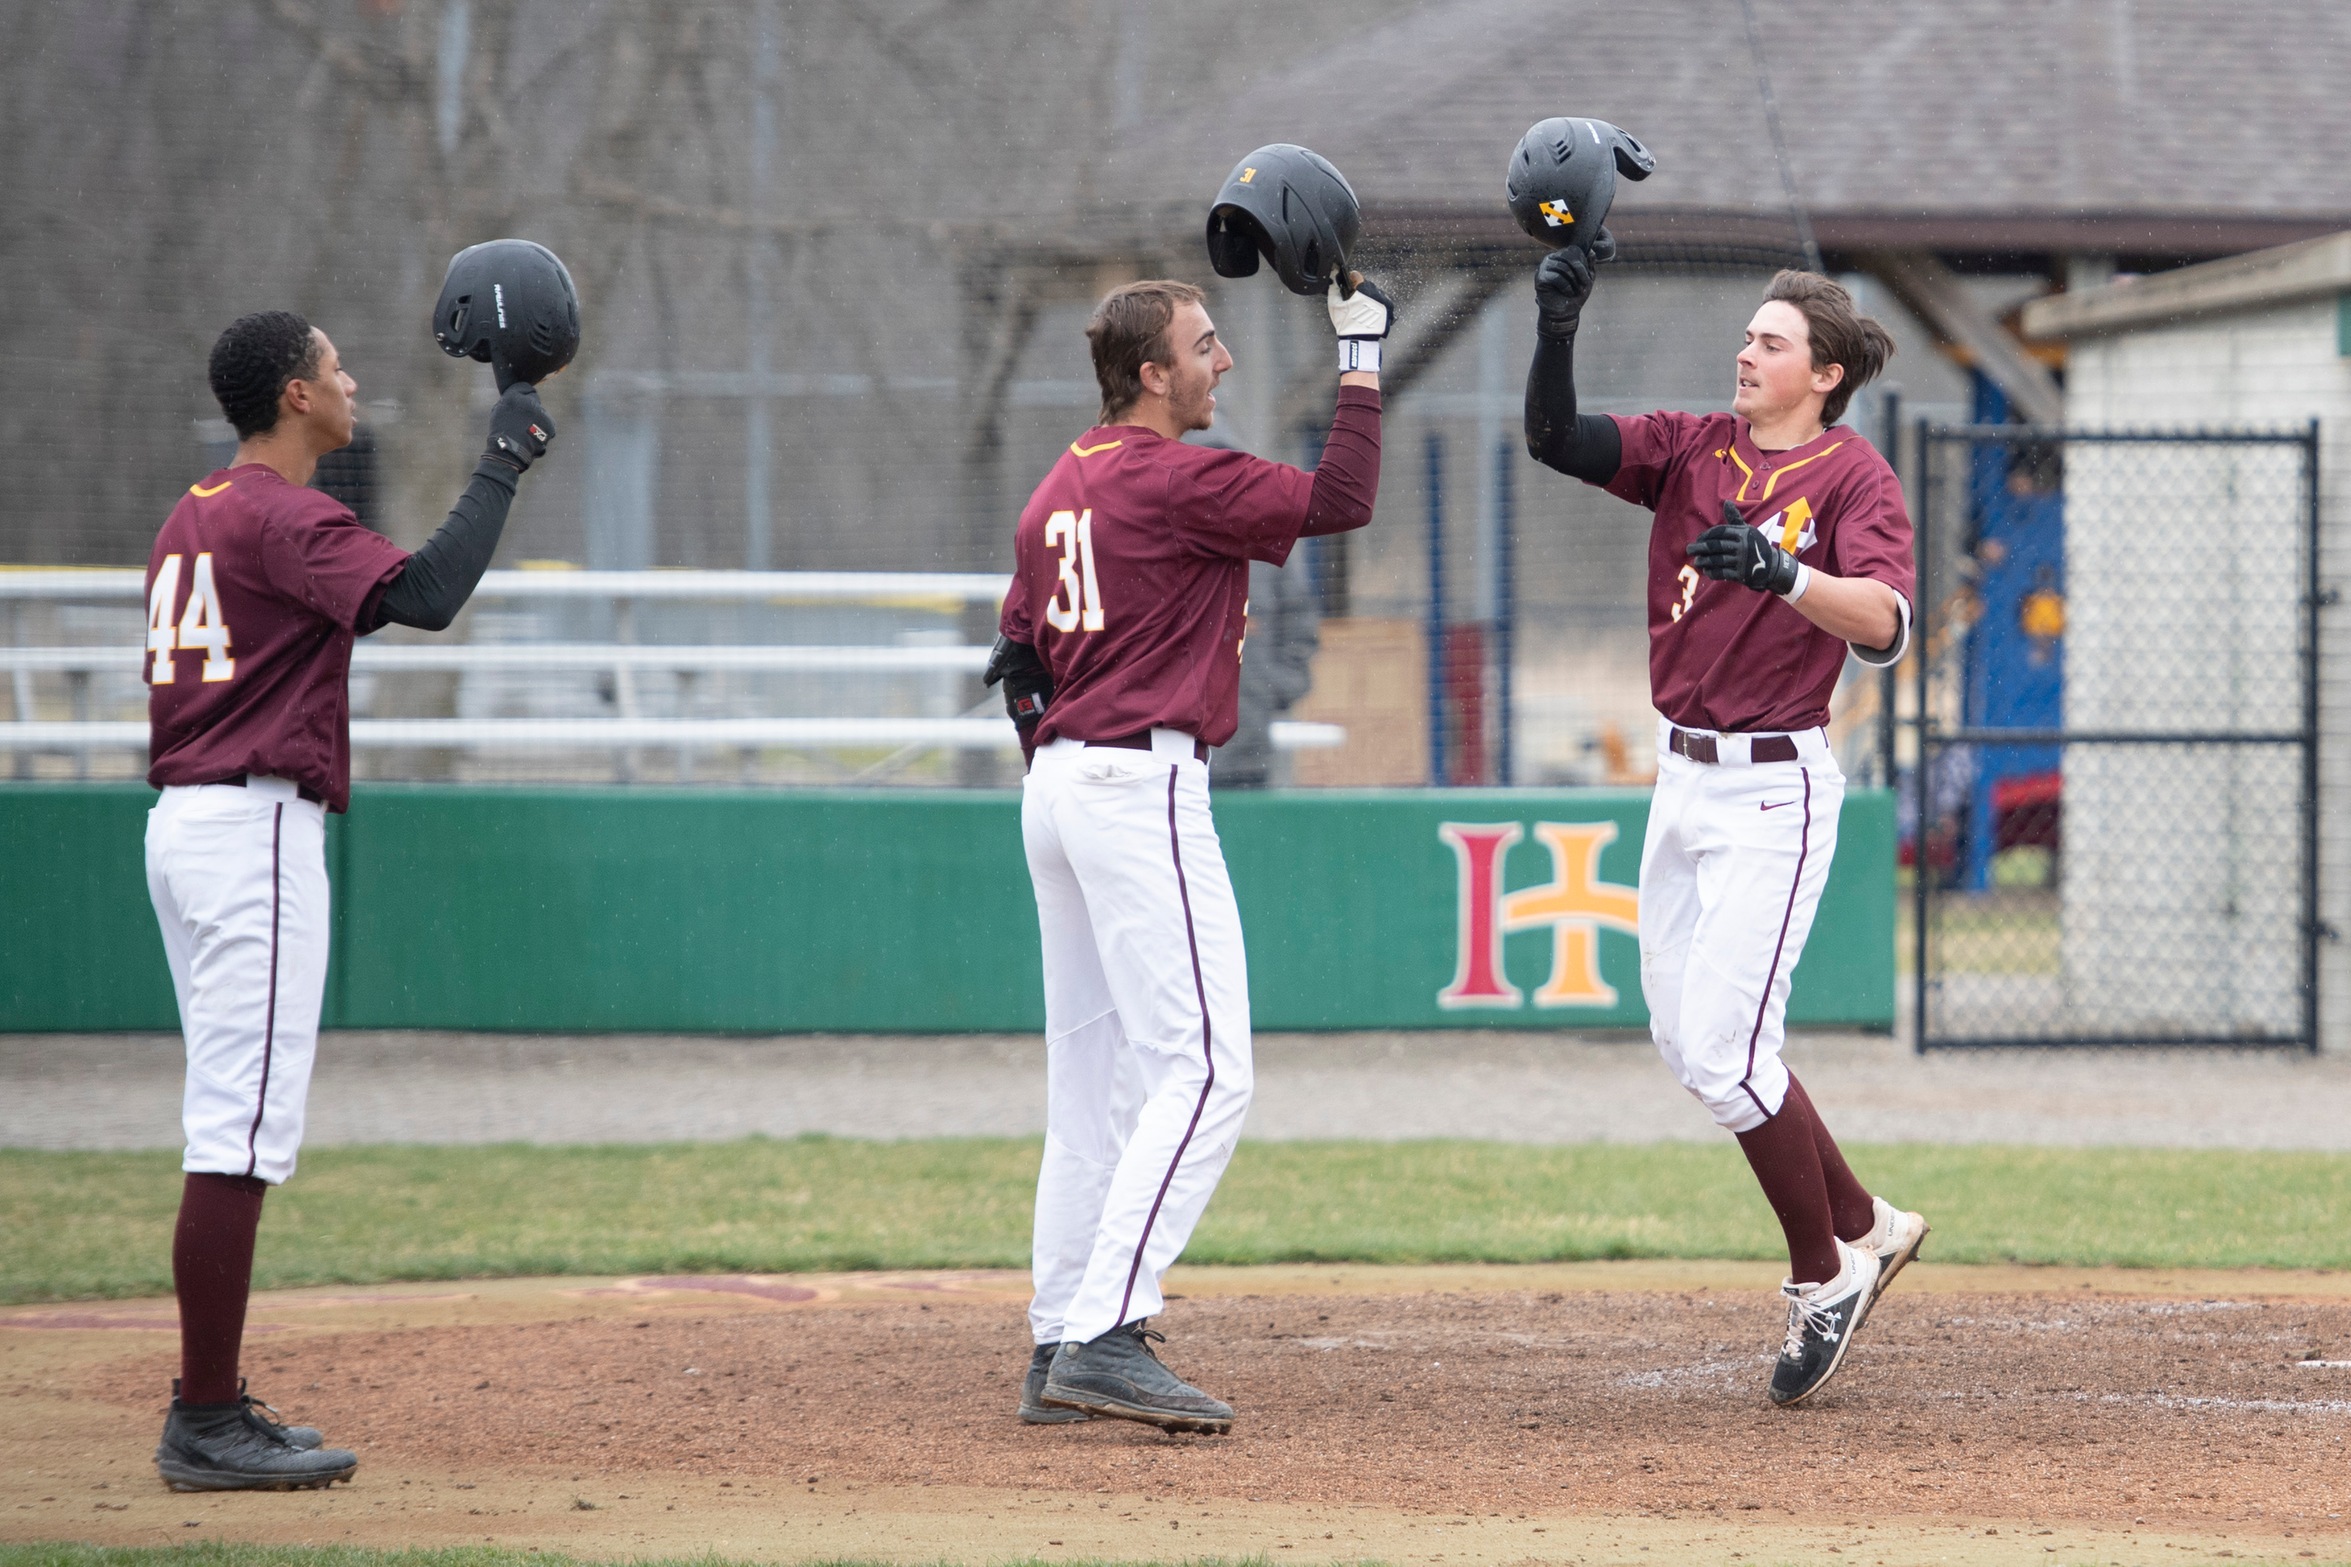 EMERICH HOMERS TWICE TO LEAD WARRIORS